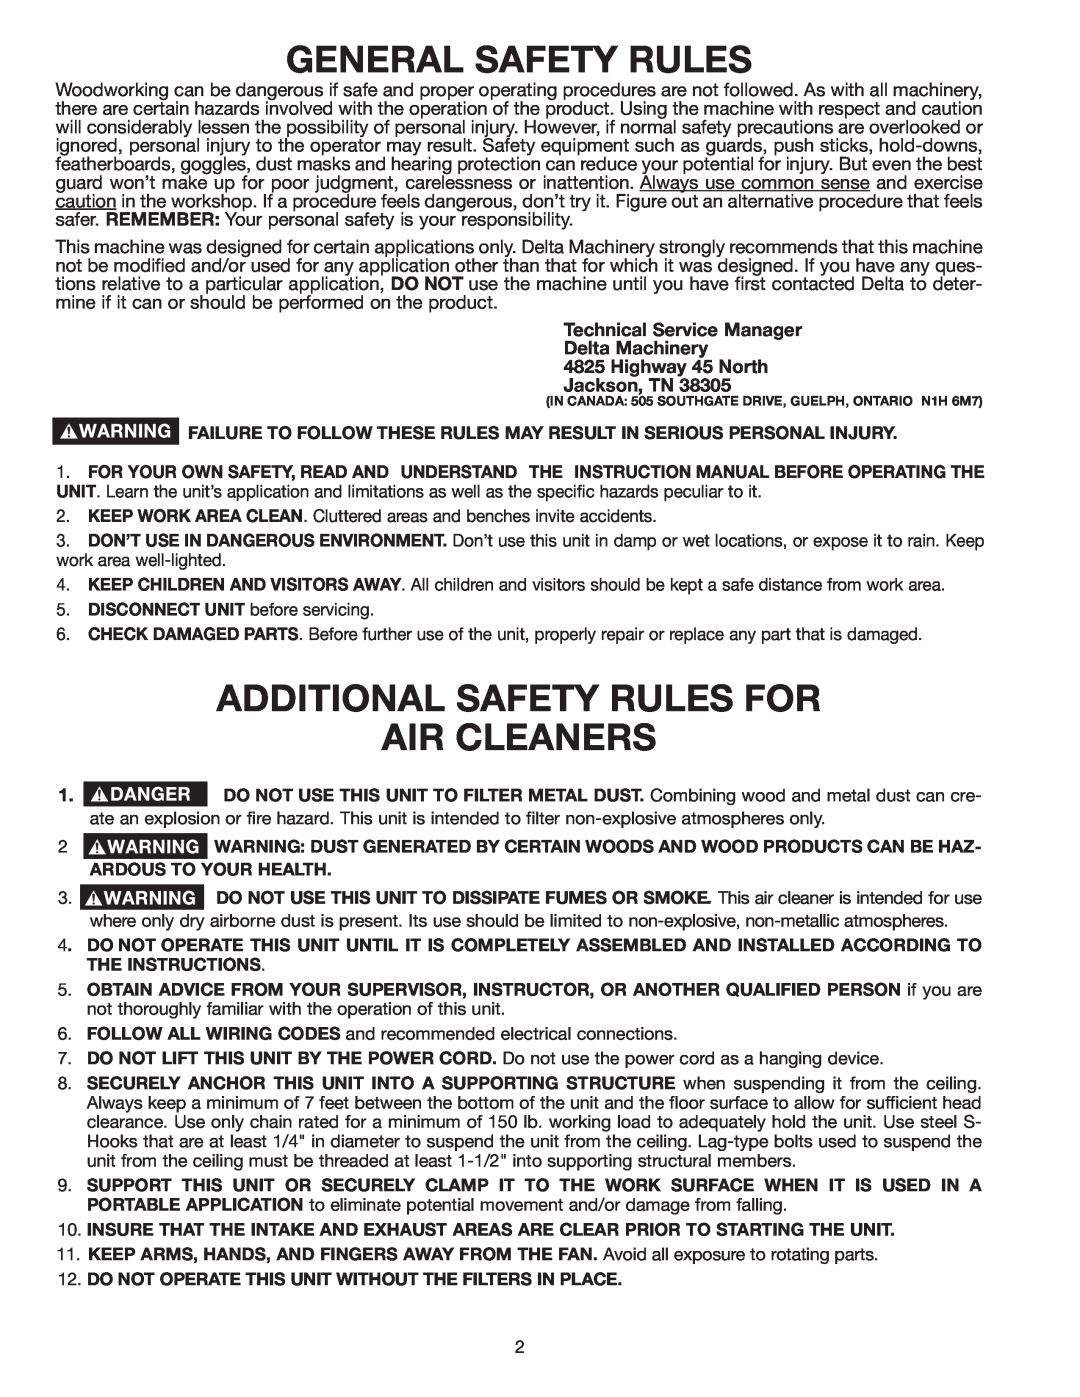 Deltaco 50-868 General Safety Rules, Additional Safety Rules For Air Cleaners, Technical Service Manager Delta Machinery 